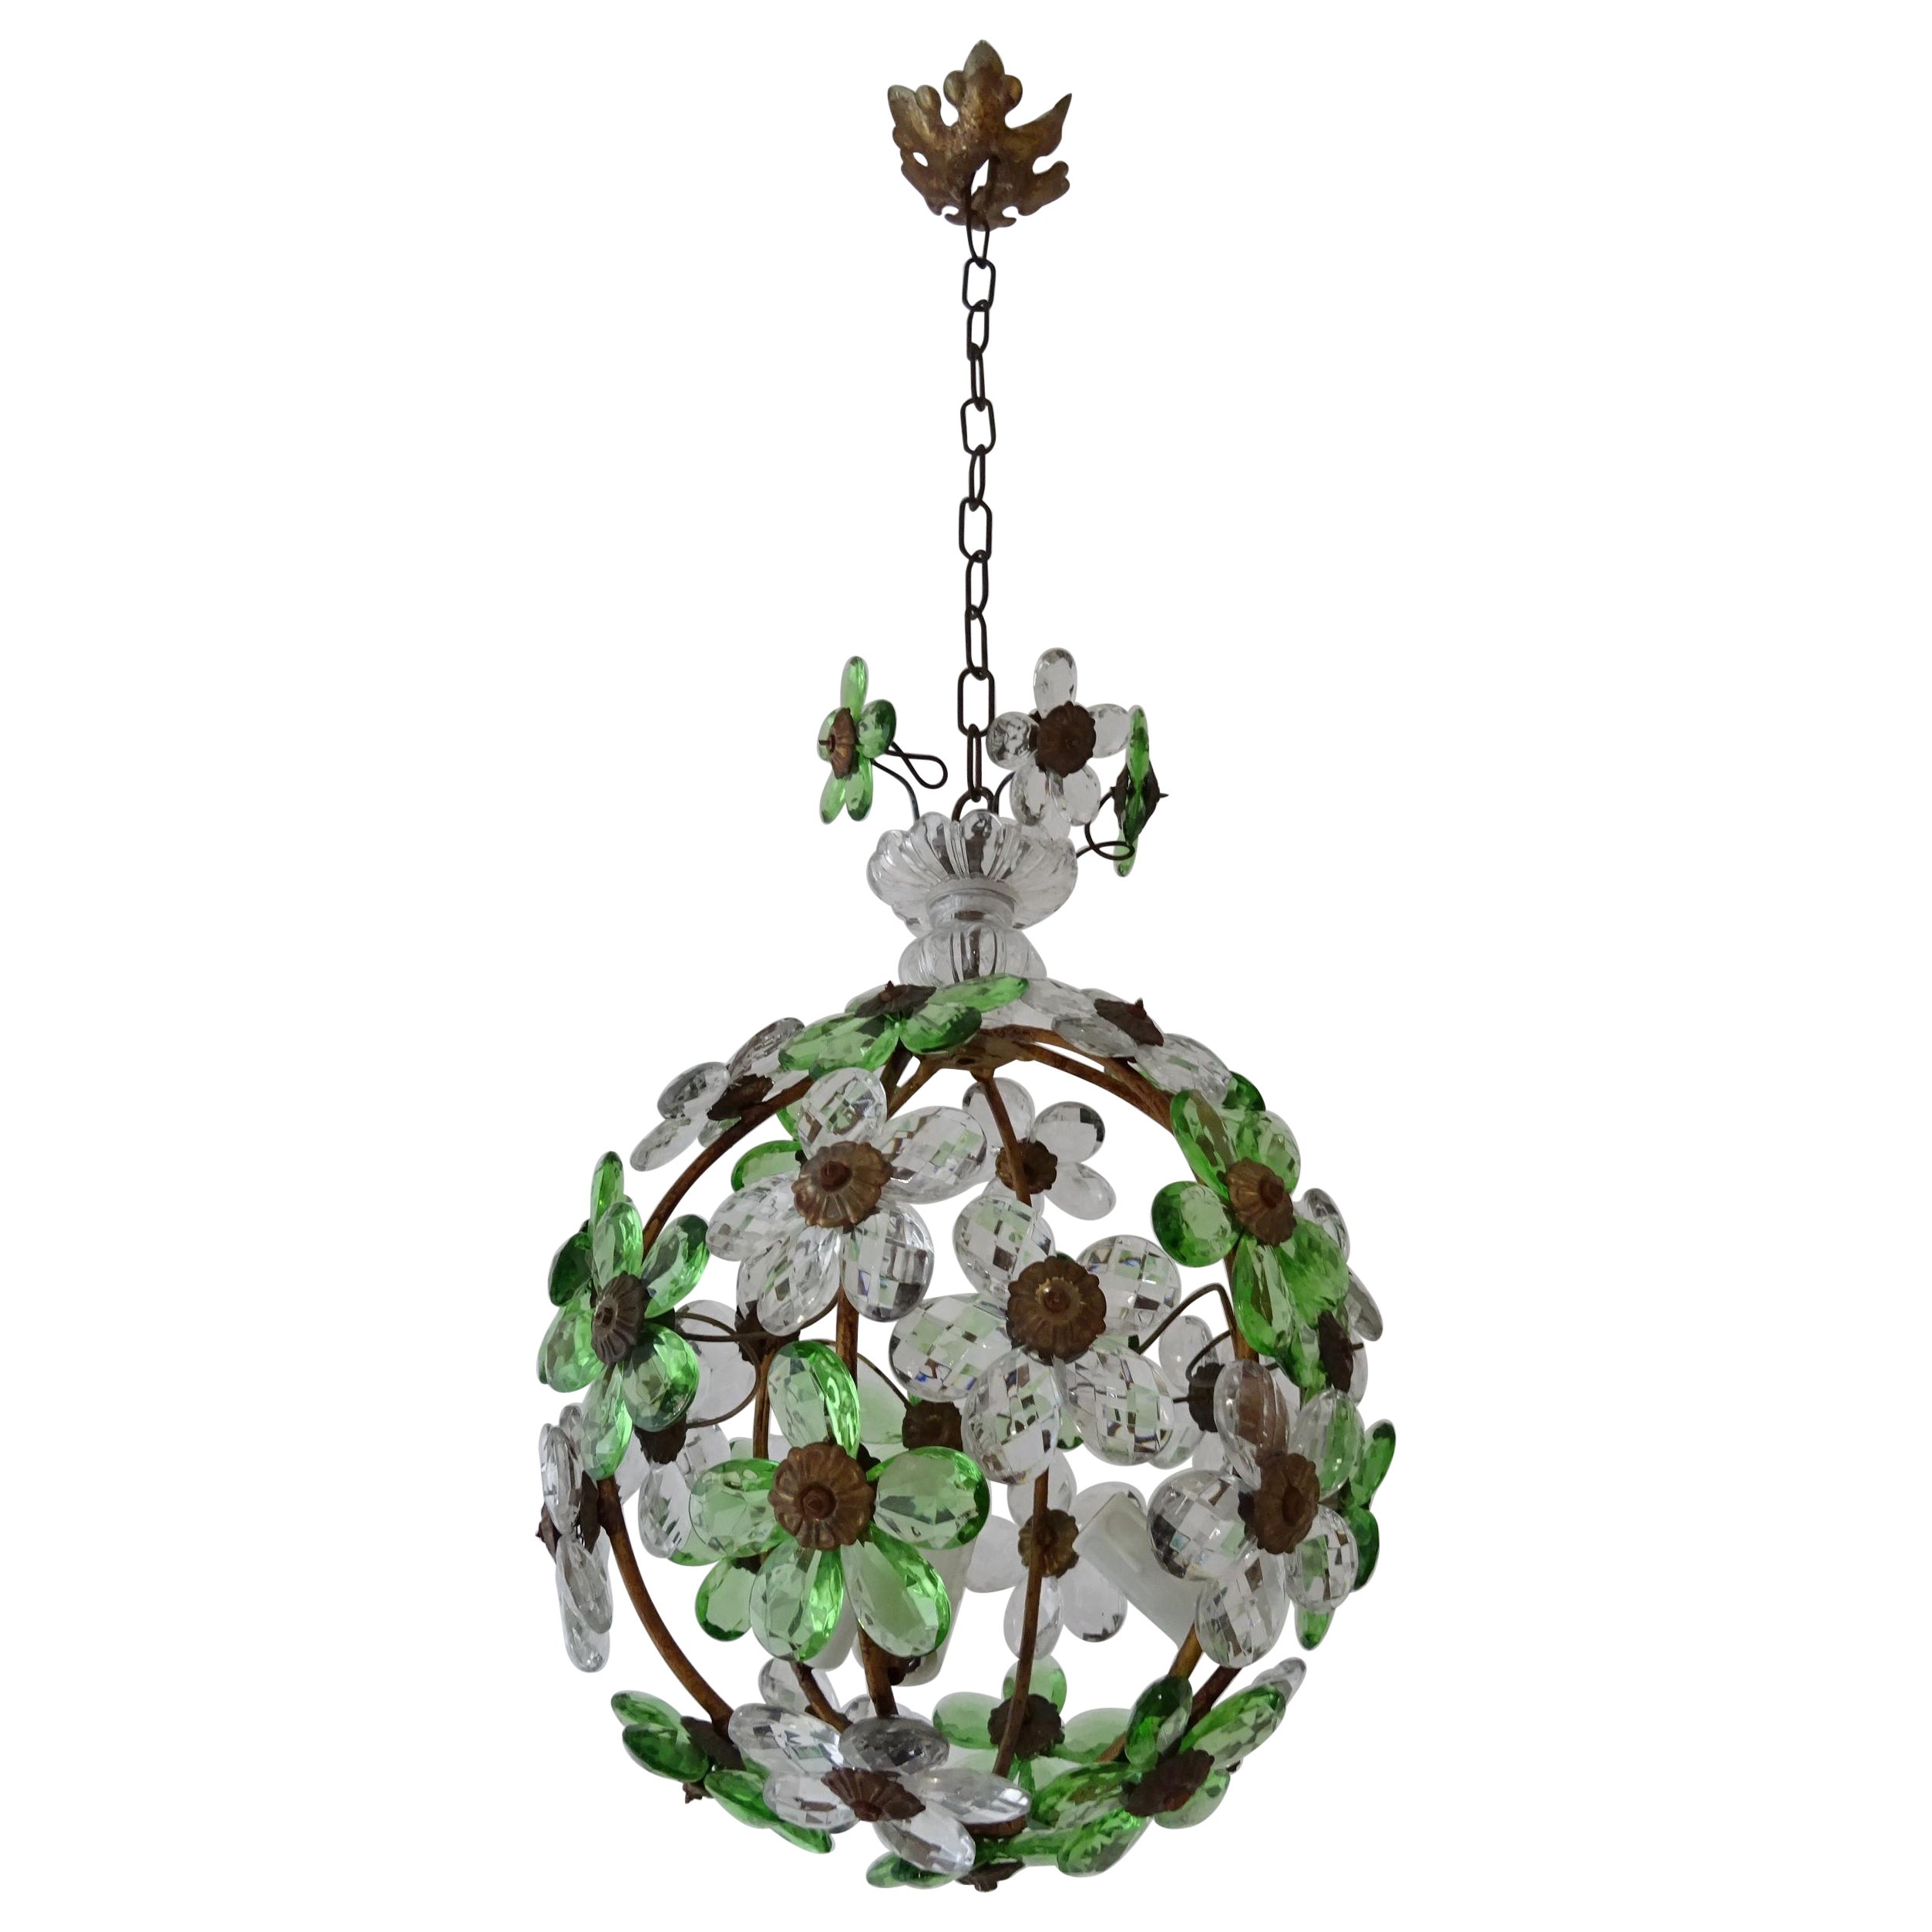 French Green Flower Ball Crystal Prisms Maison Baguès Style Chandelier, 1920s